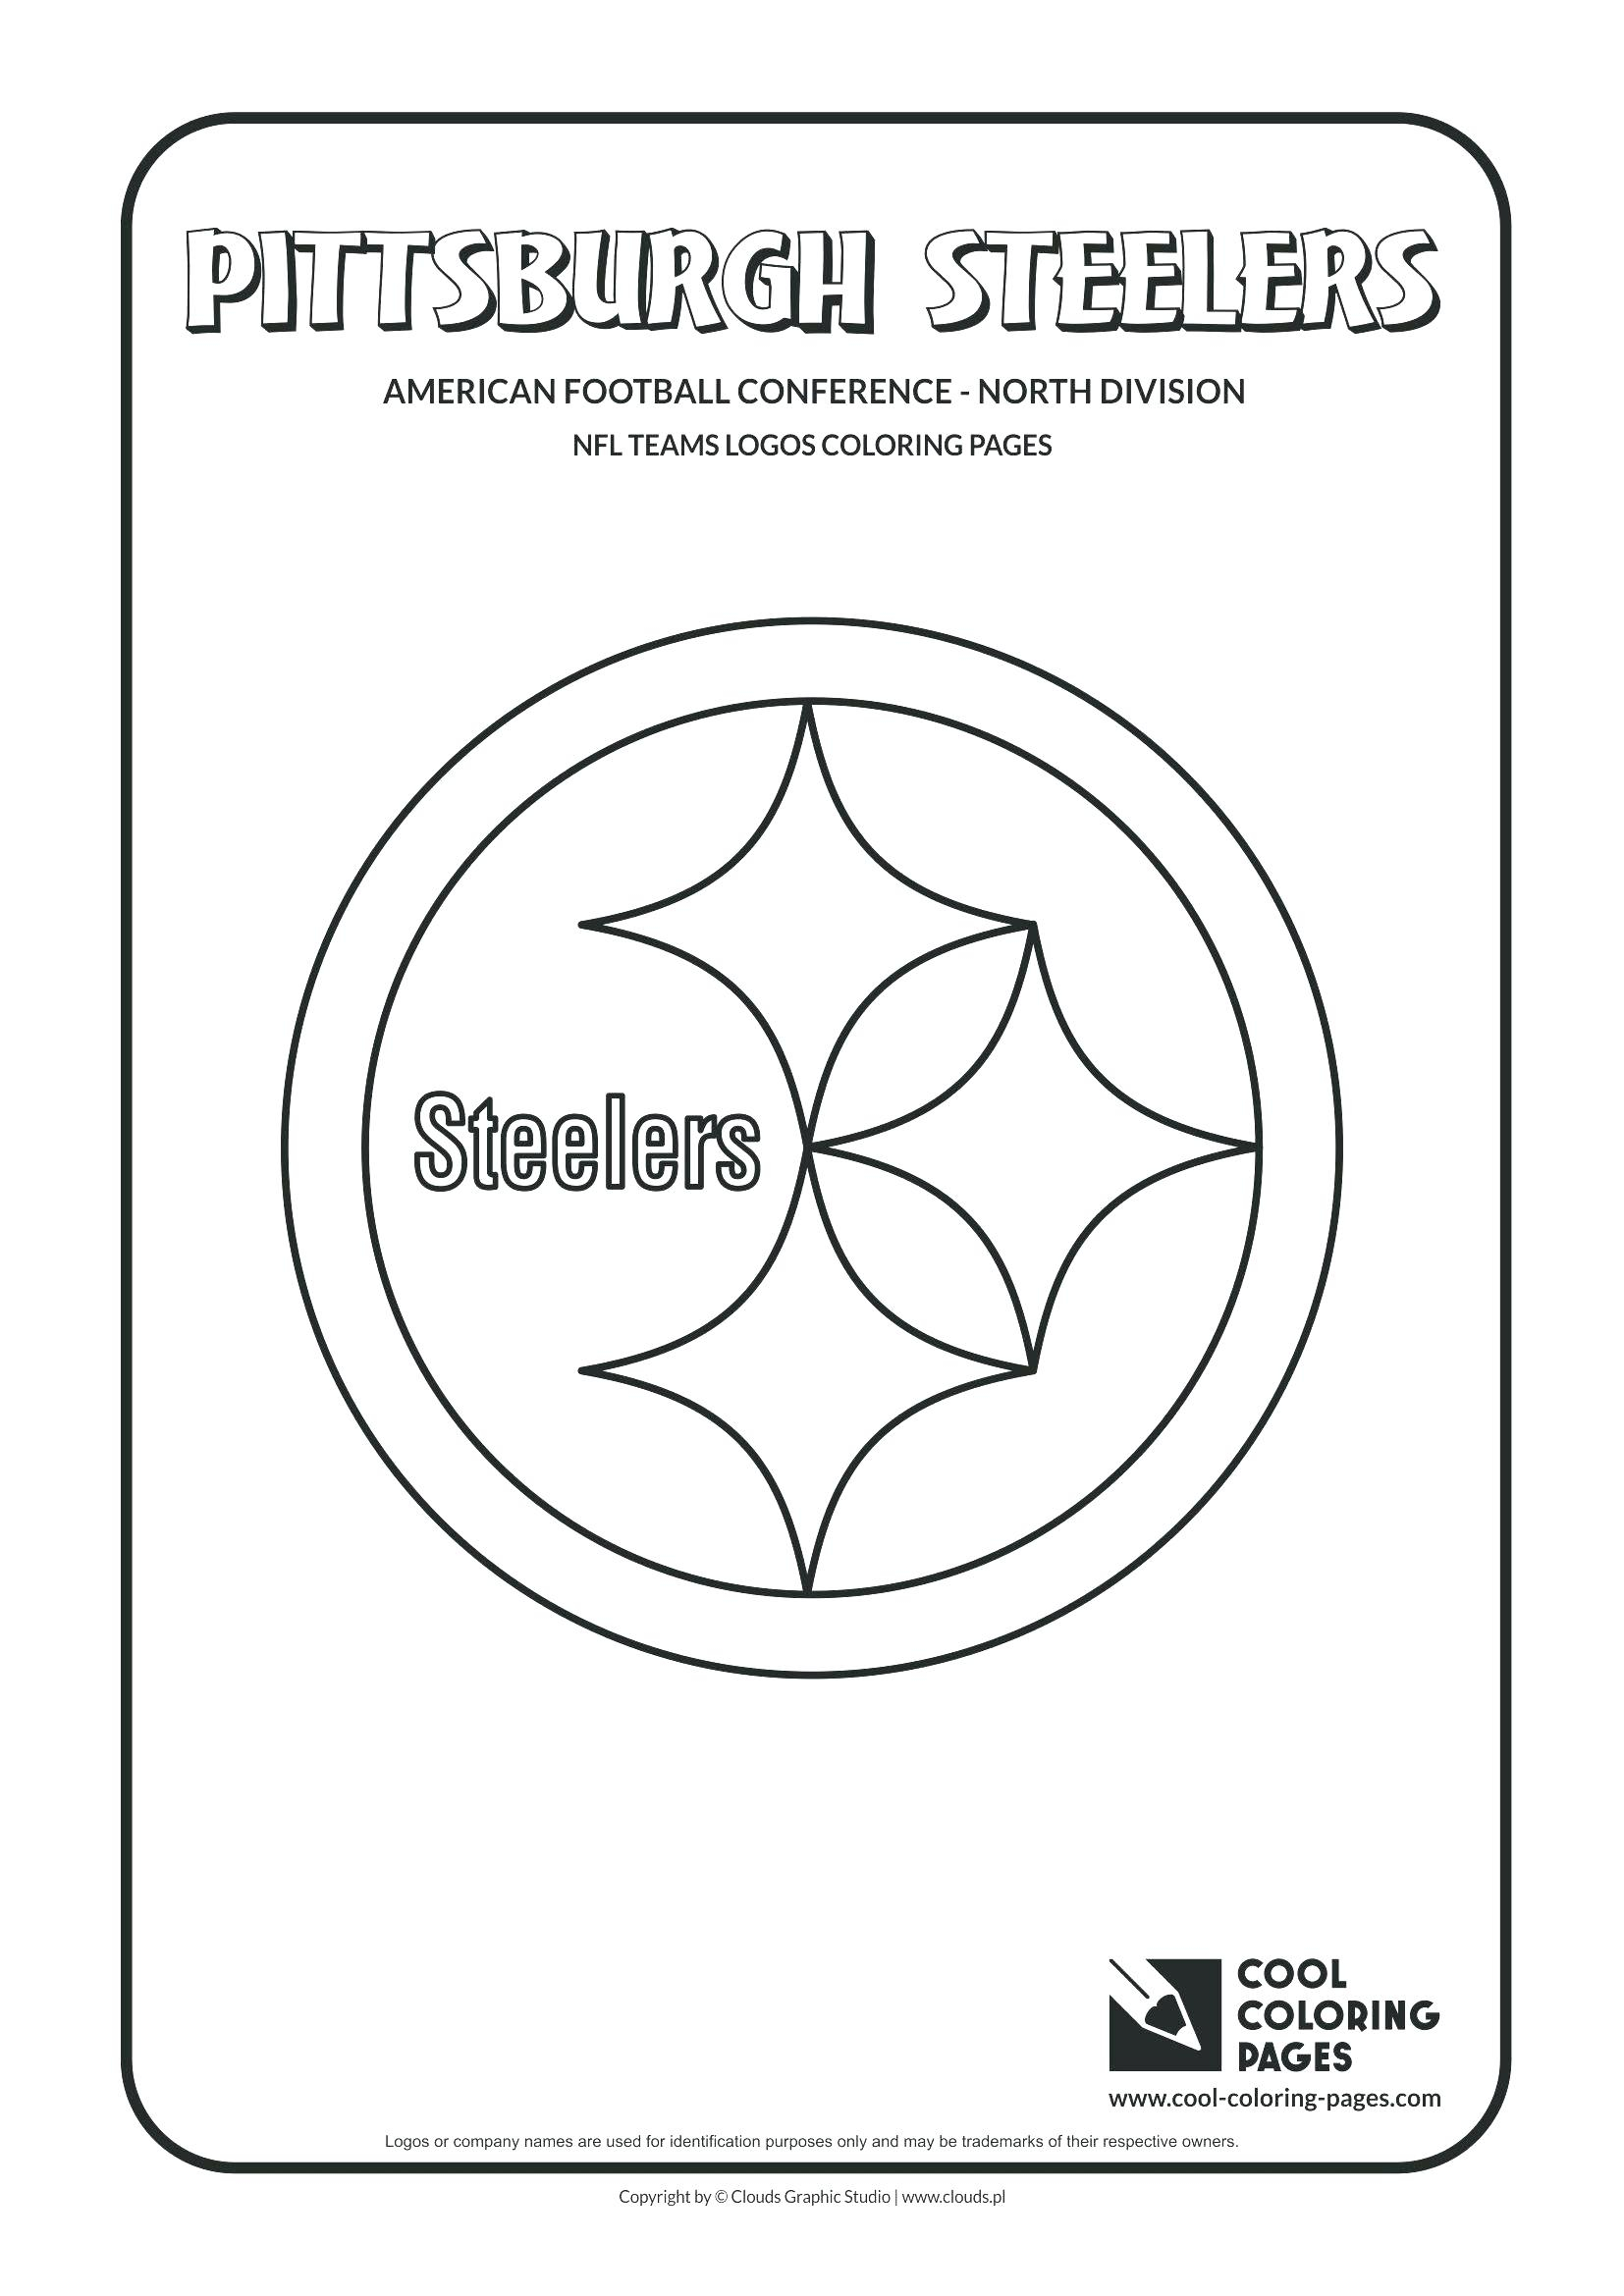 Super Bowl Coloring Pages Free Bowl Coloring Pages Axialsheetco